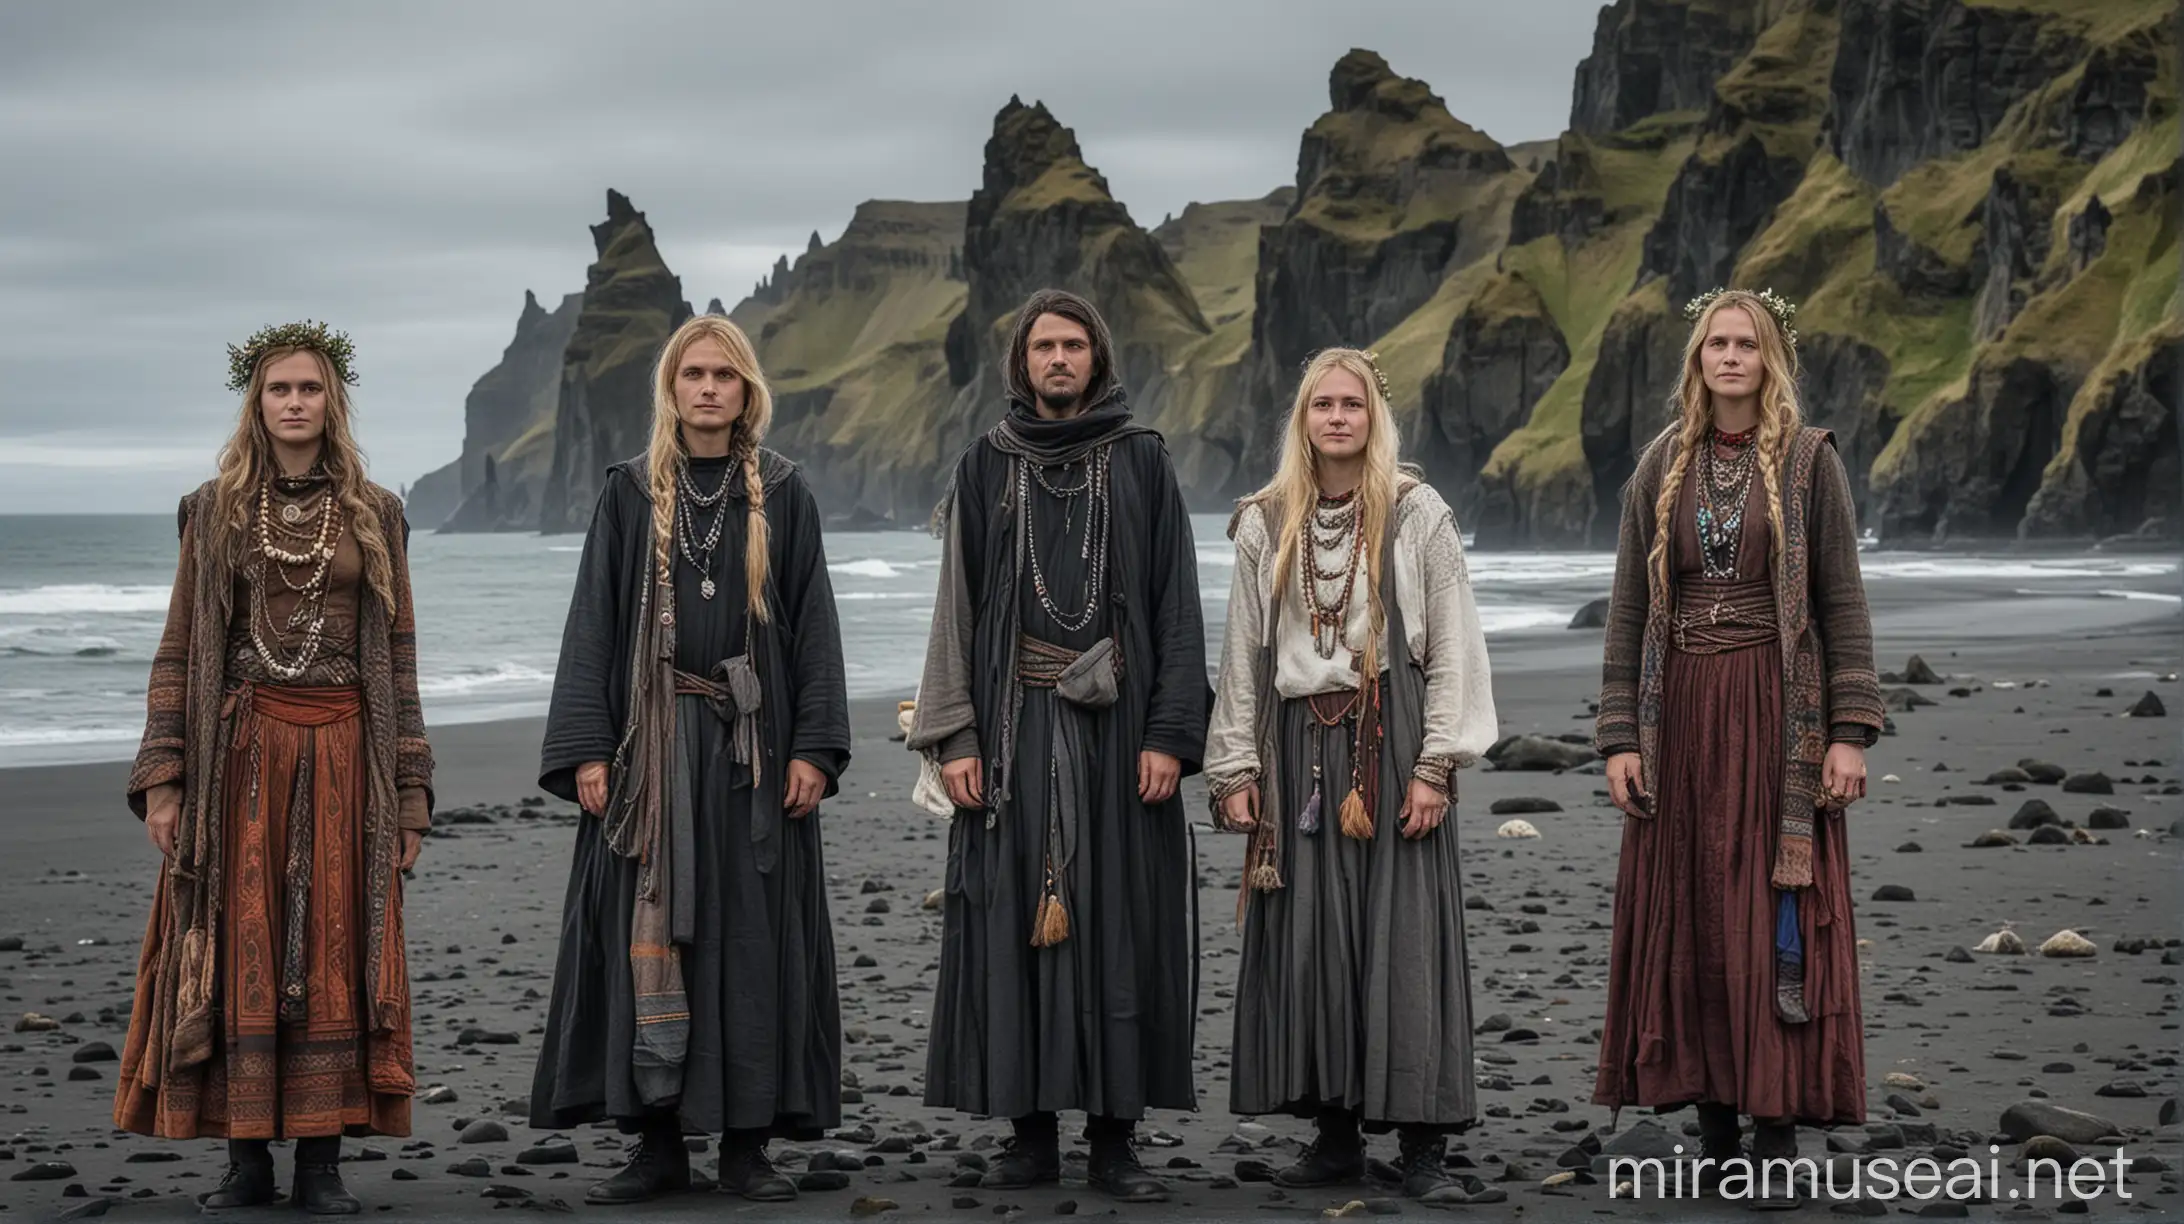 
the local outfits of people of Reynisdrangar